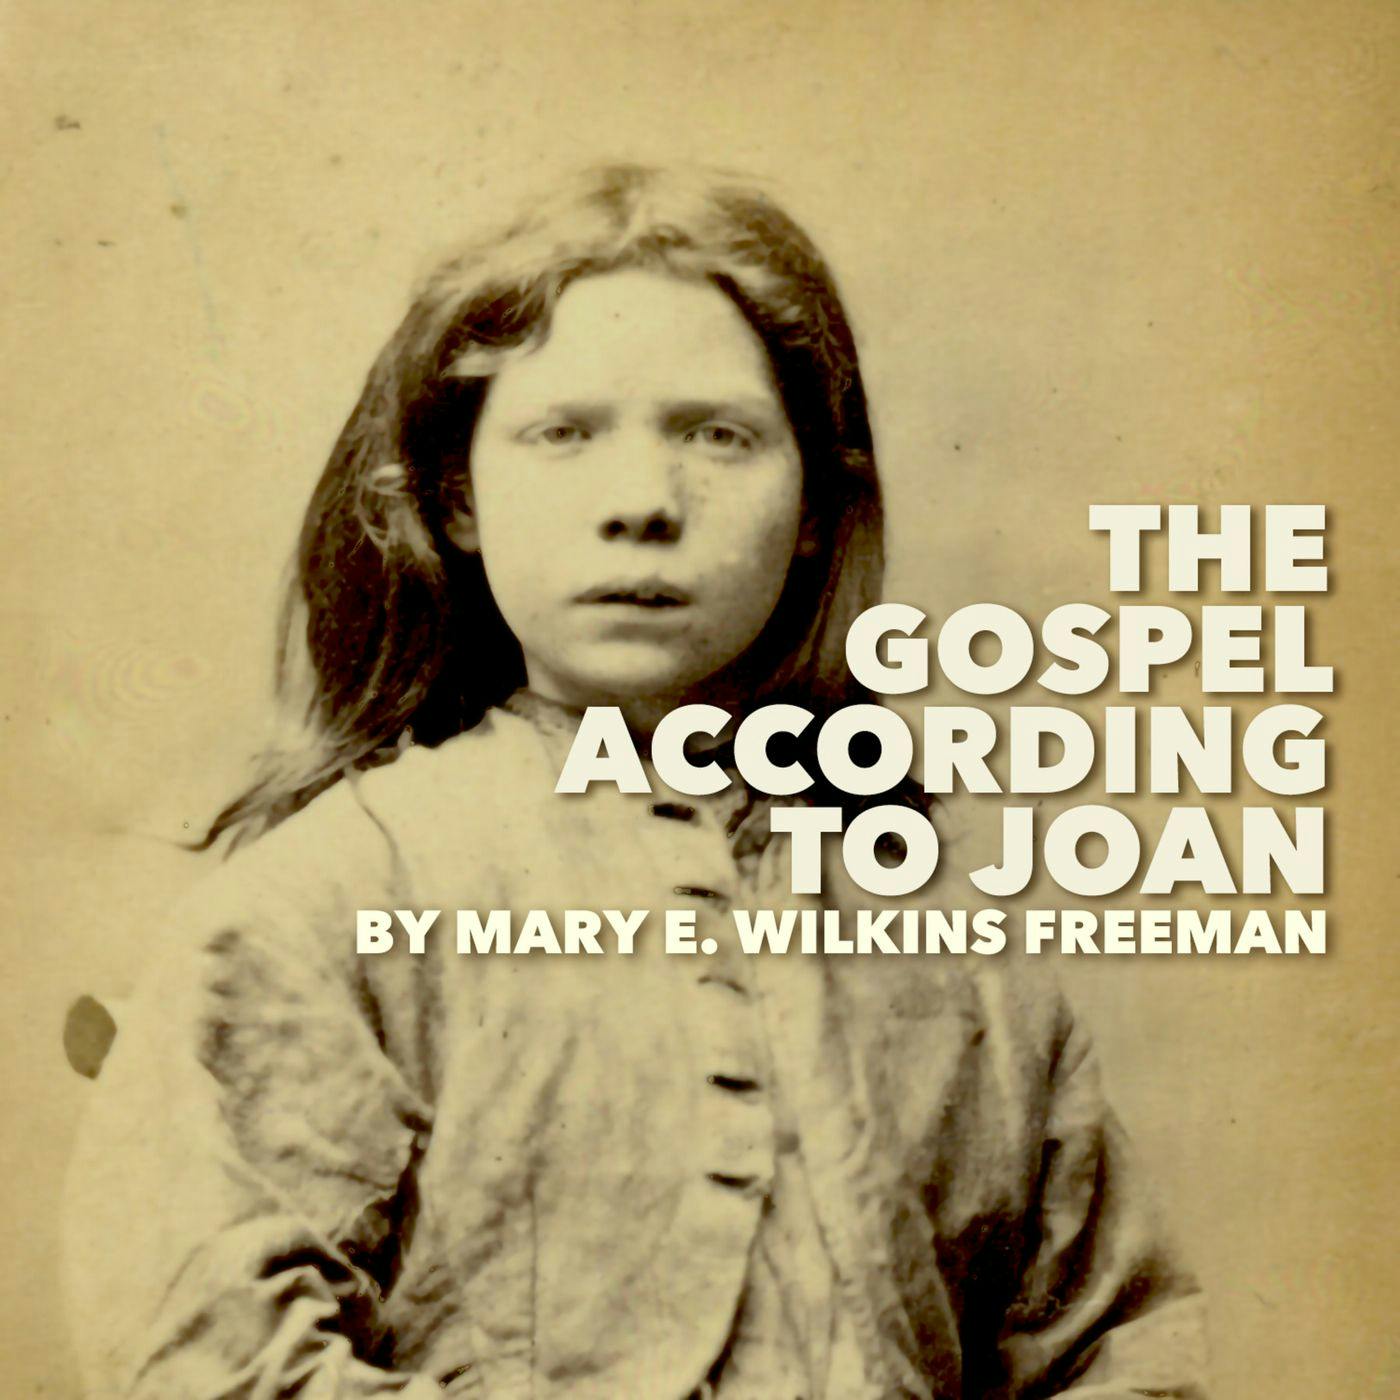 The Gospel According to Joan by Mary E. Wilkins Freeman